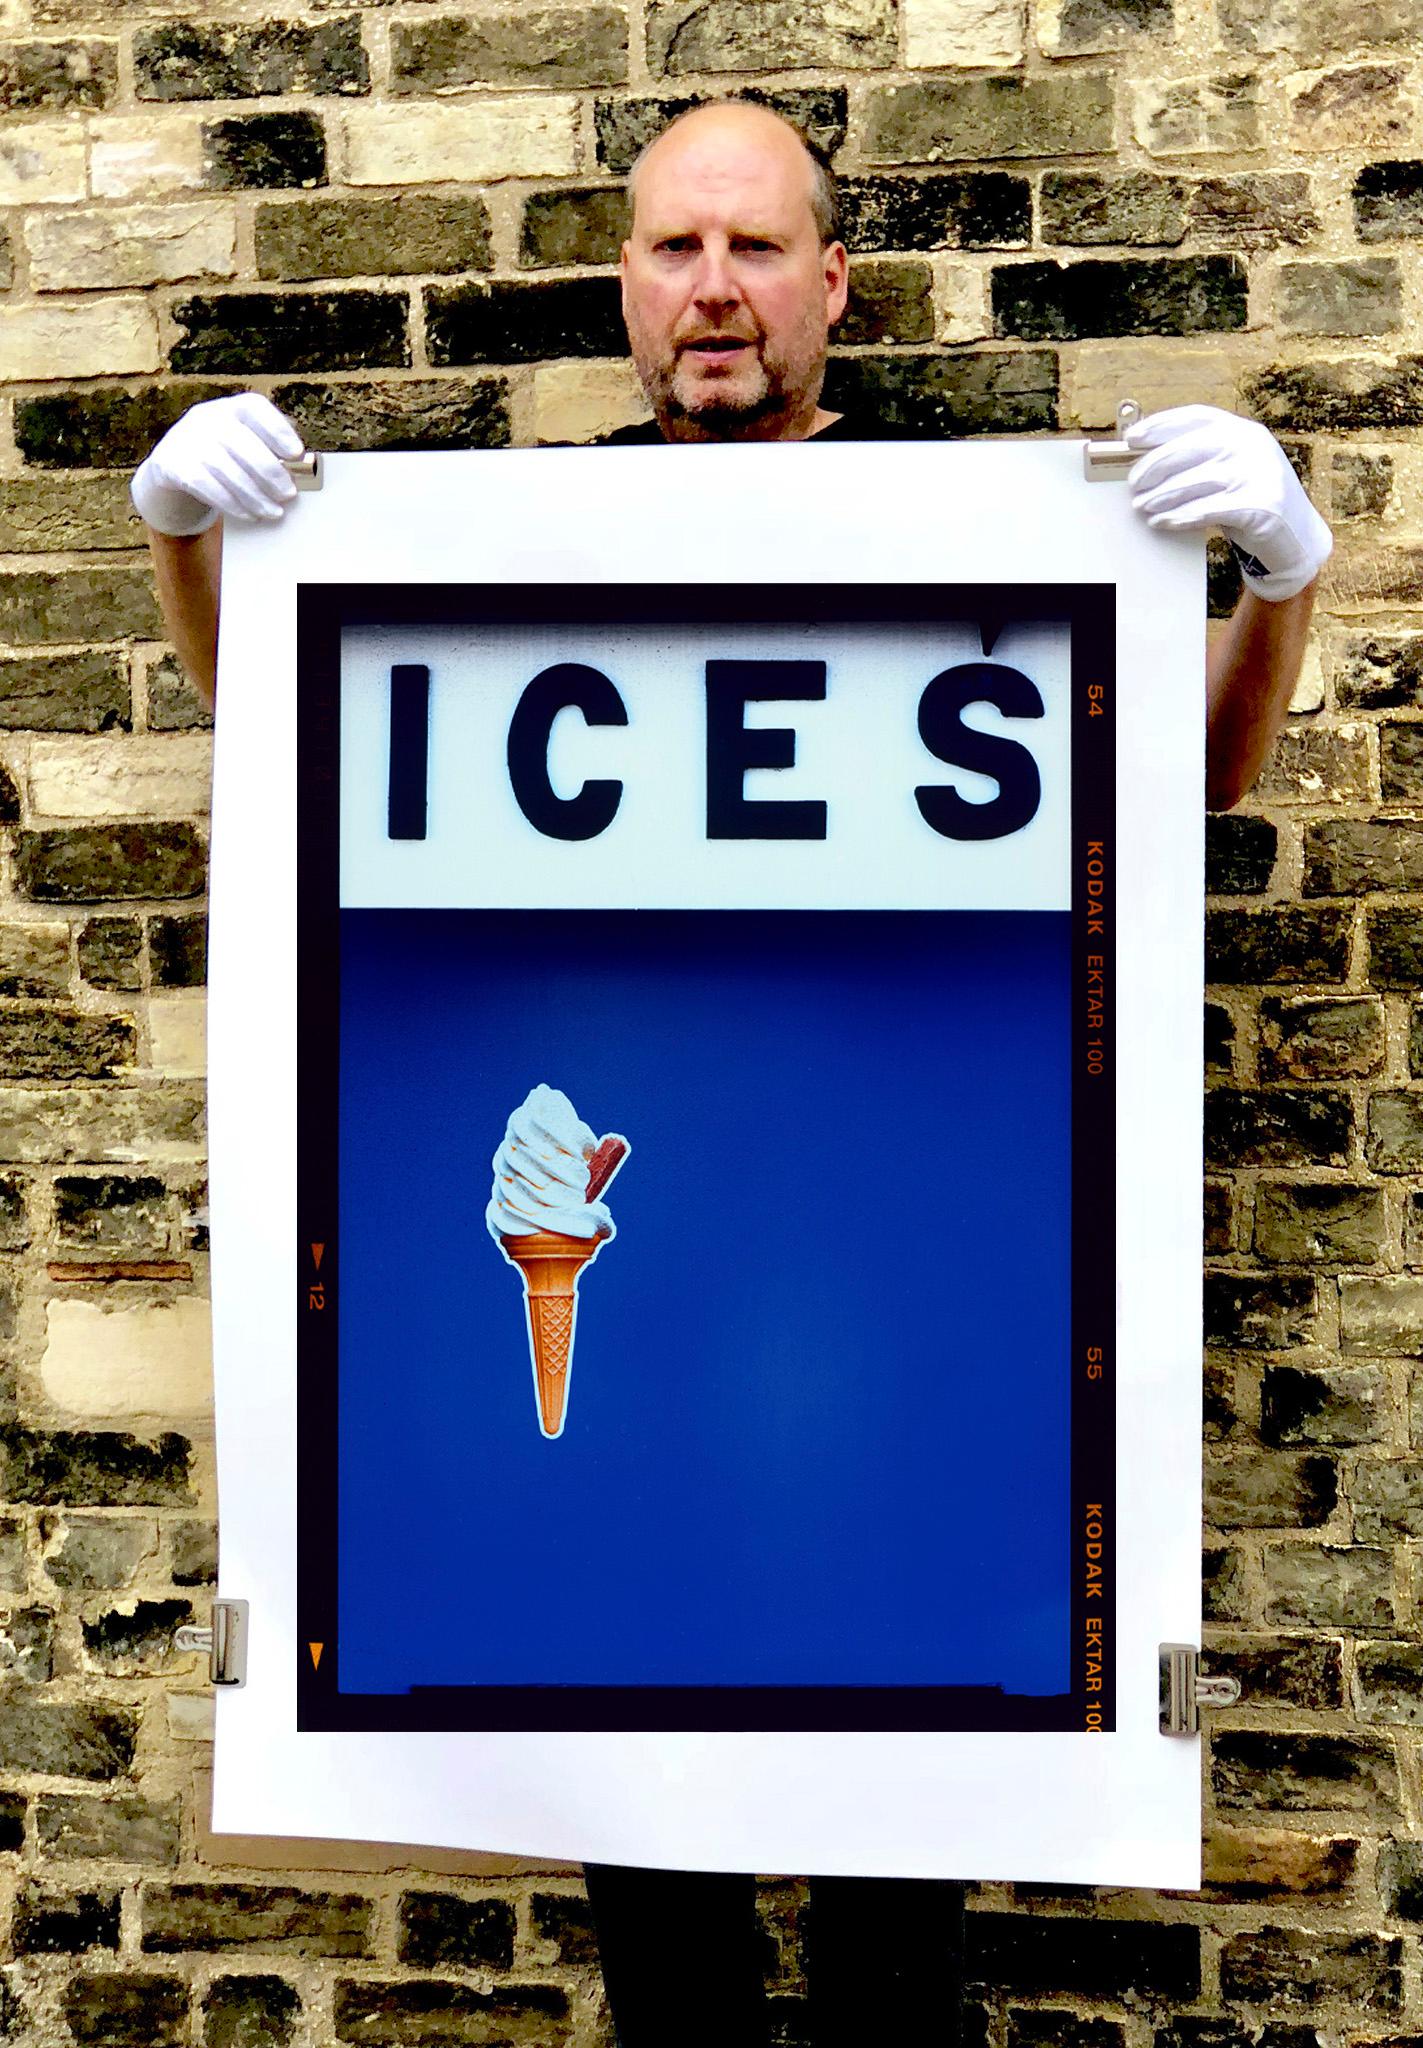 Ices, Bexhill-on-Sea - British seaside color photography 1